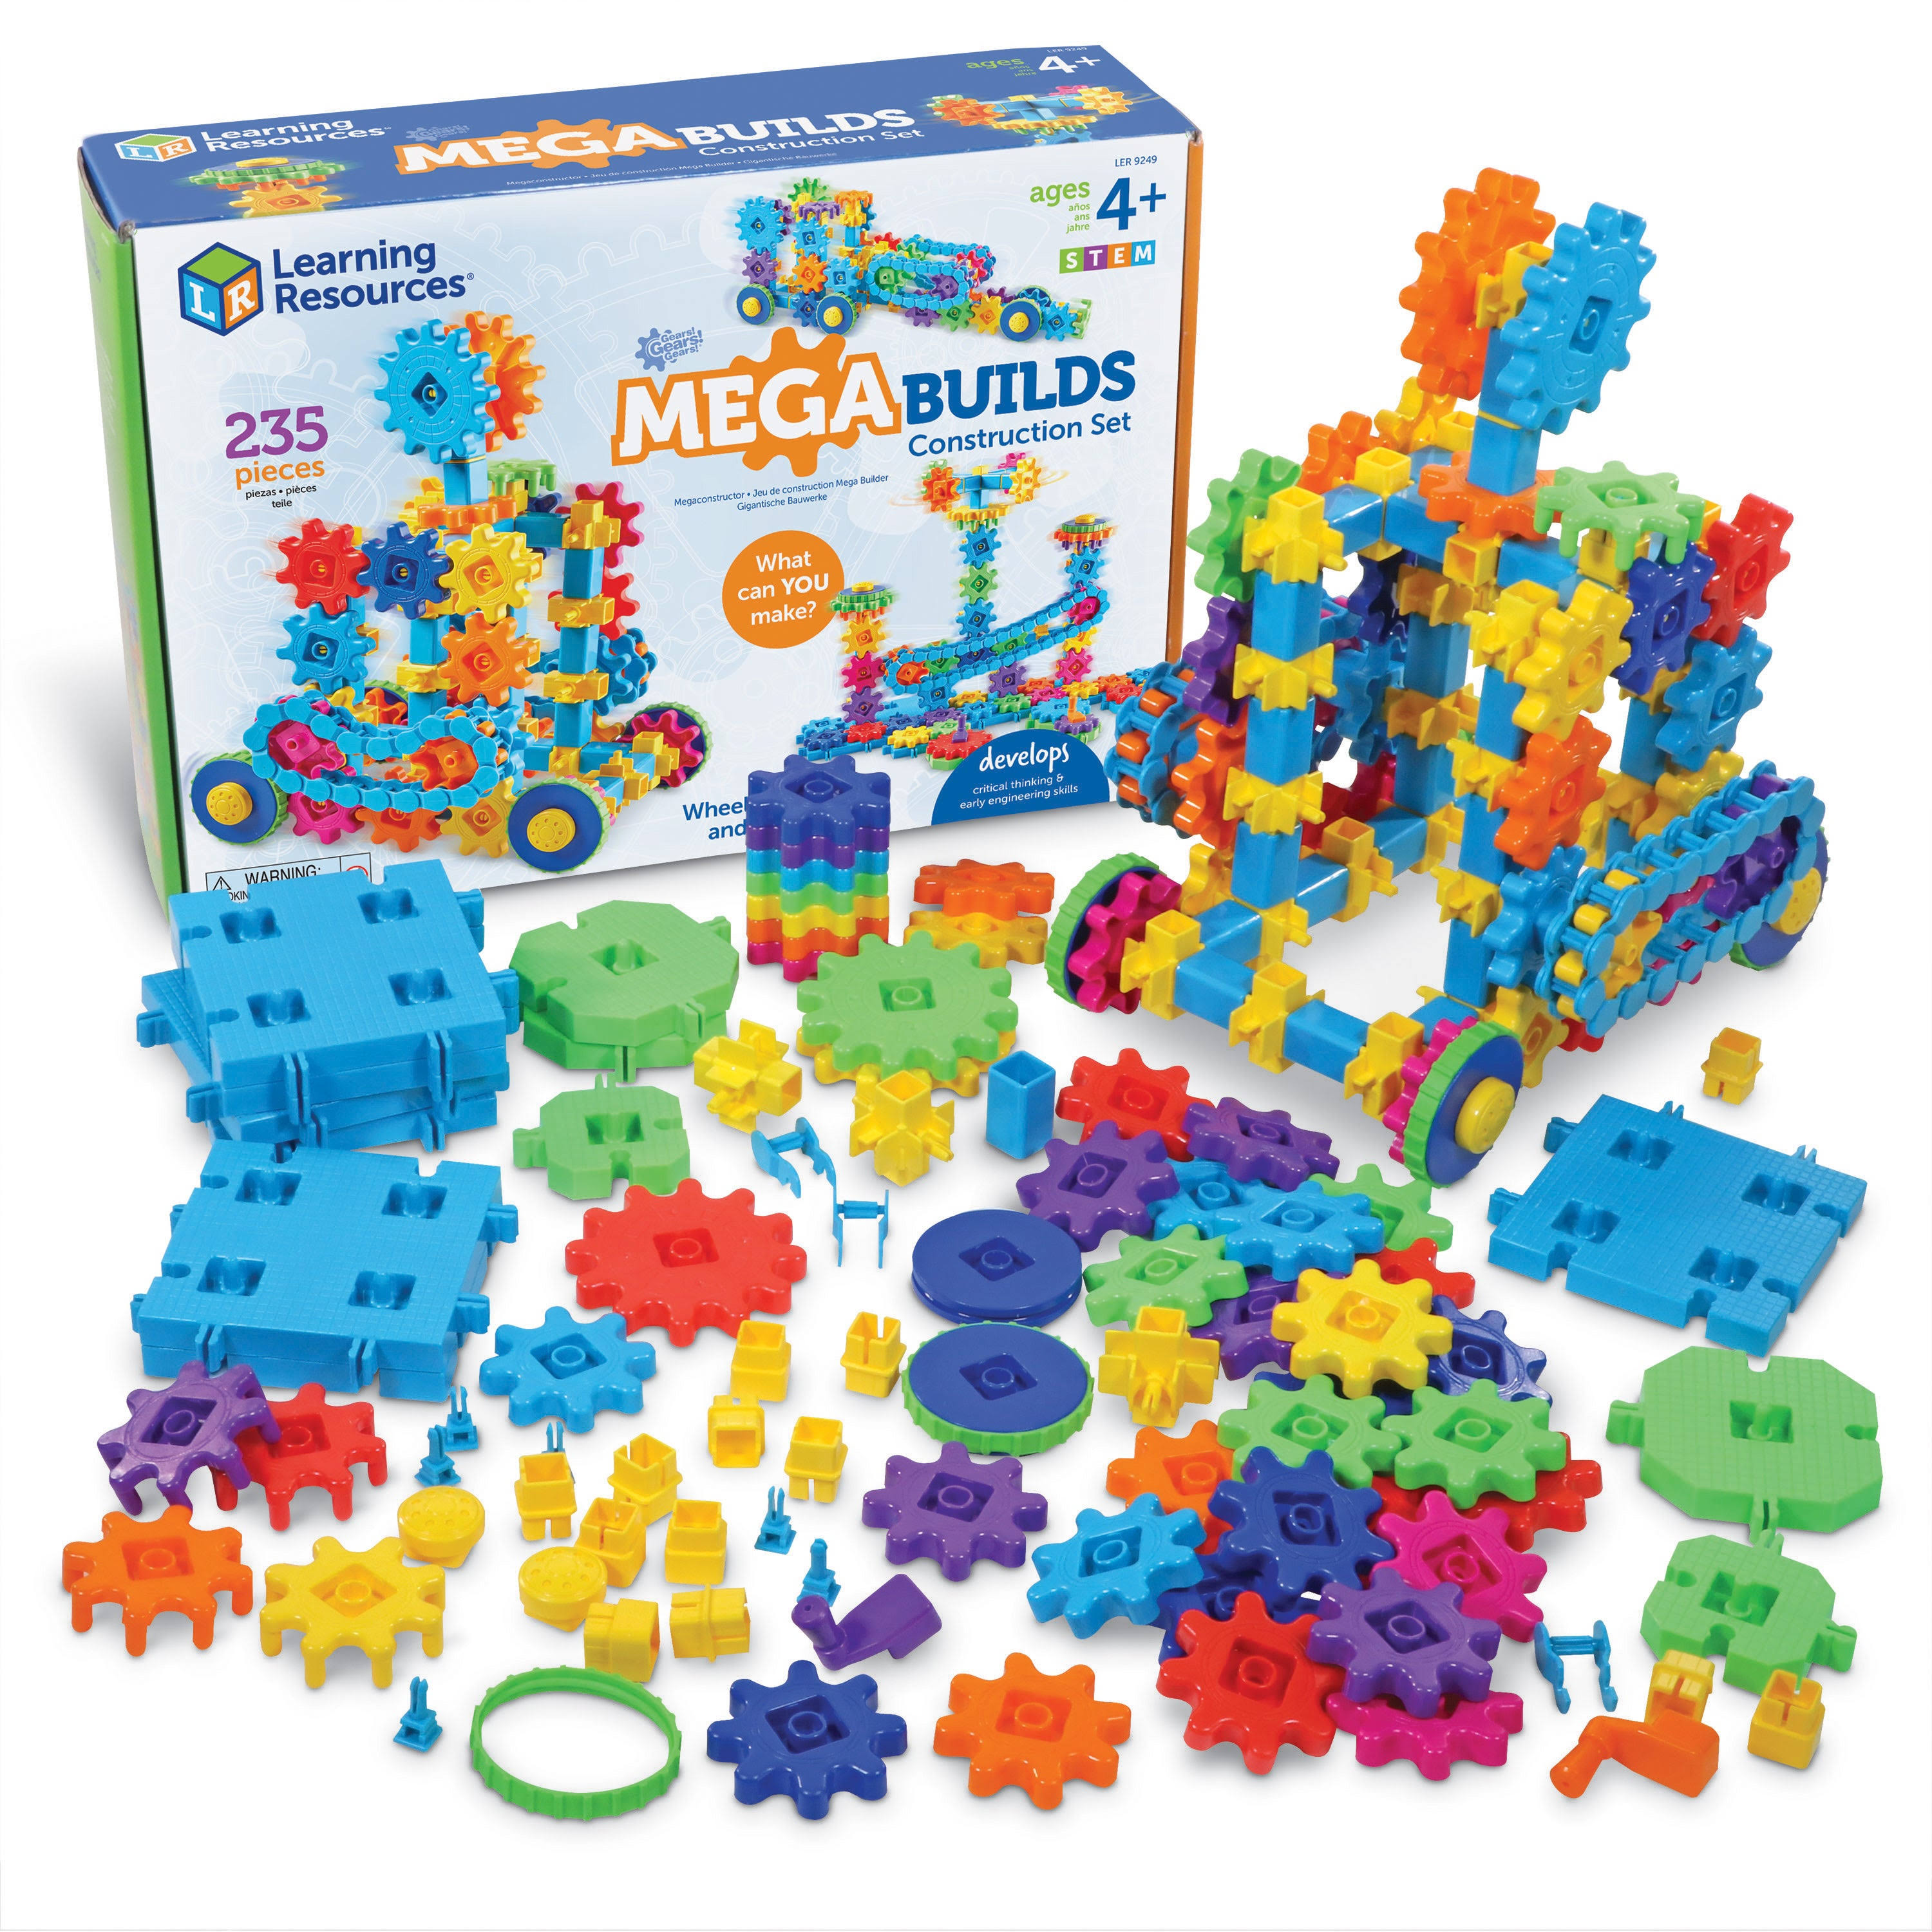 Learning Resources - Gears! Gears! Gears! Mega Builds